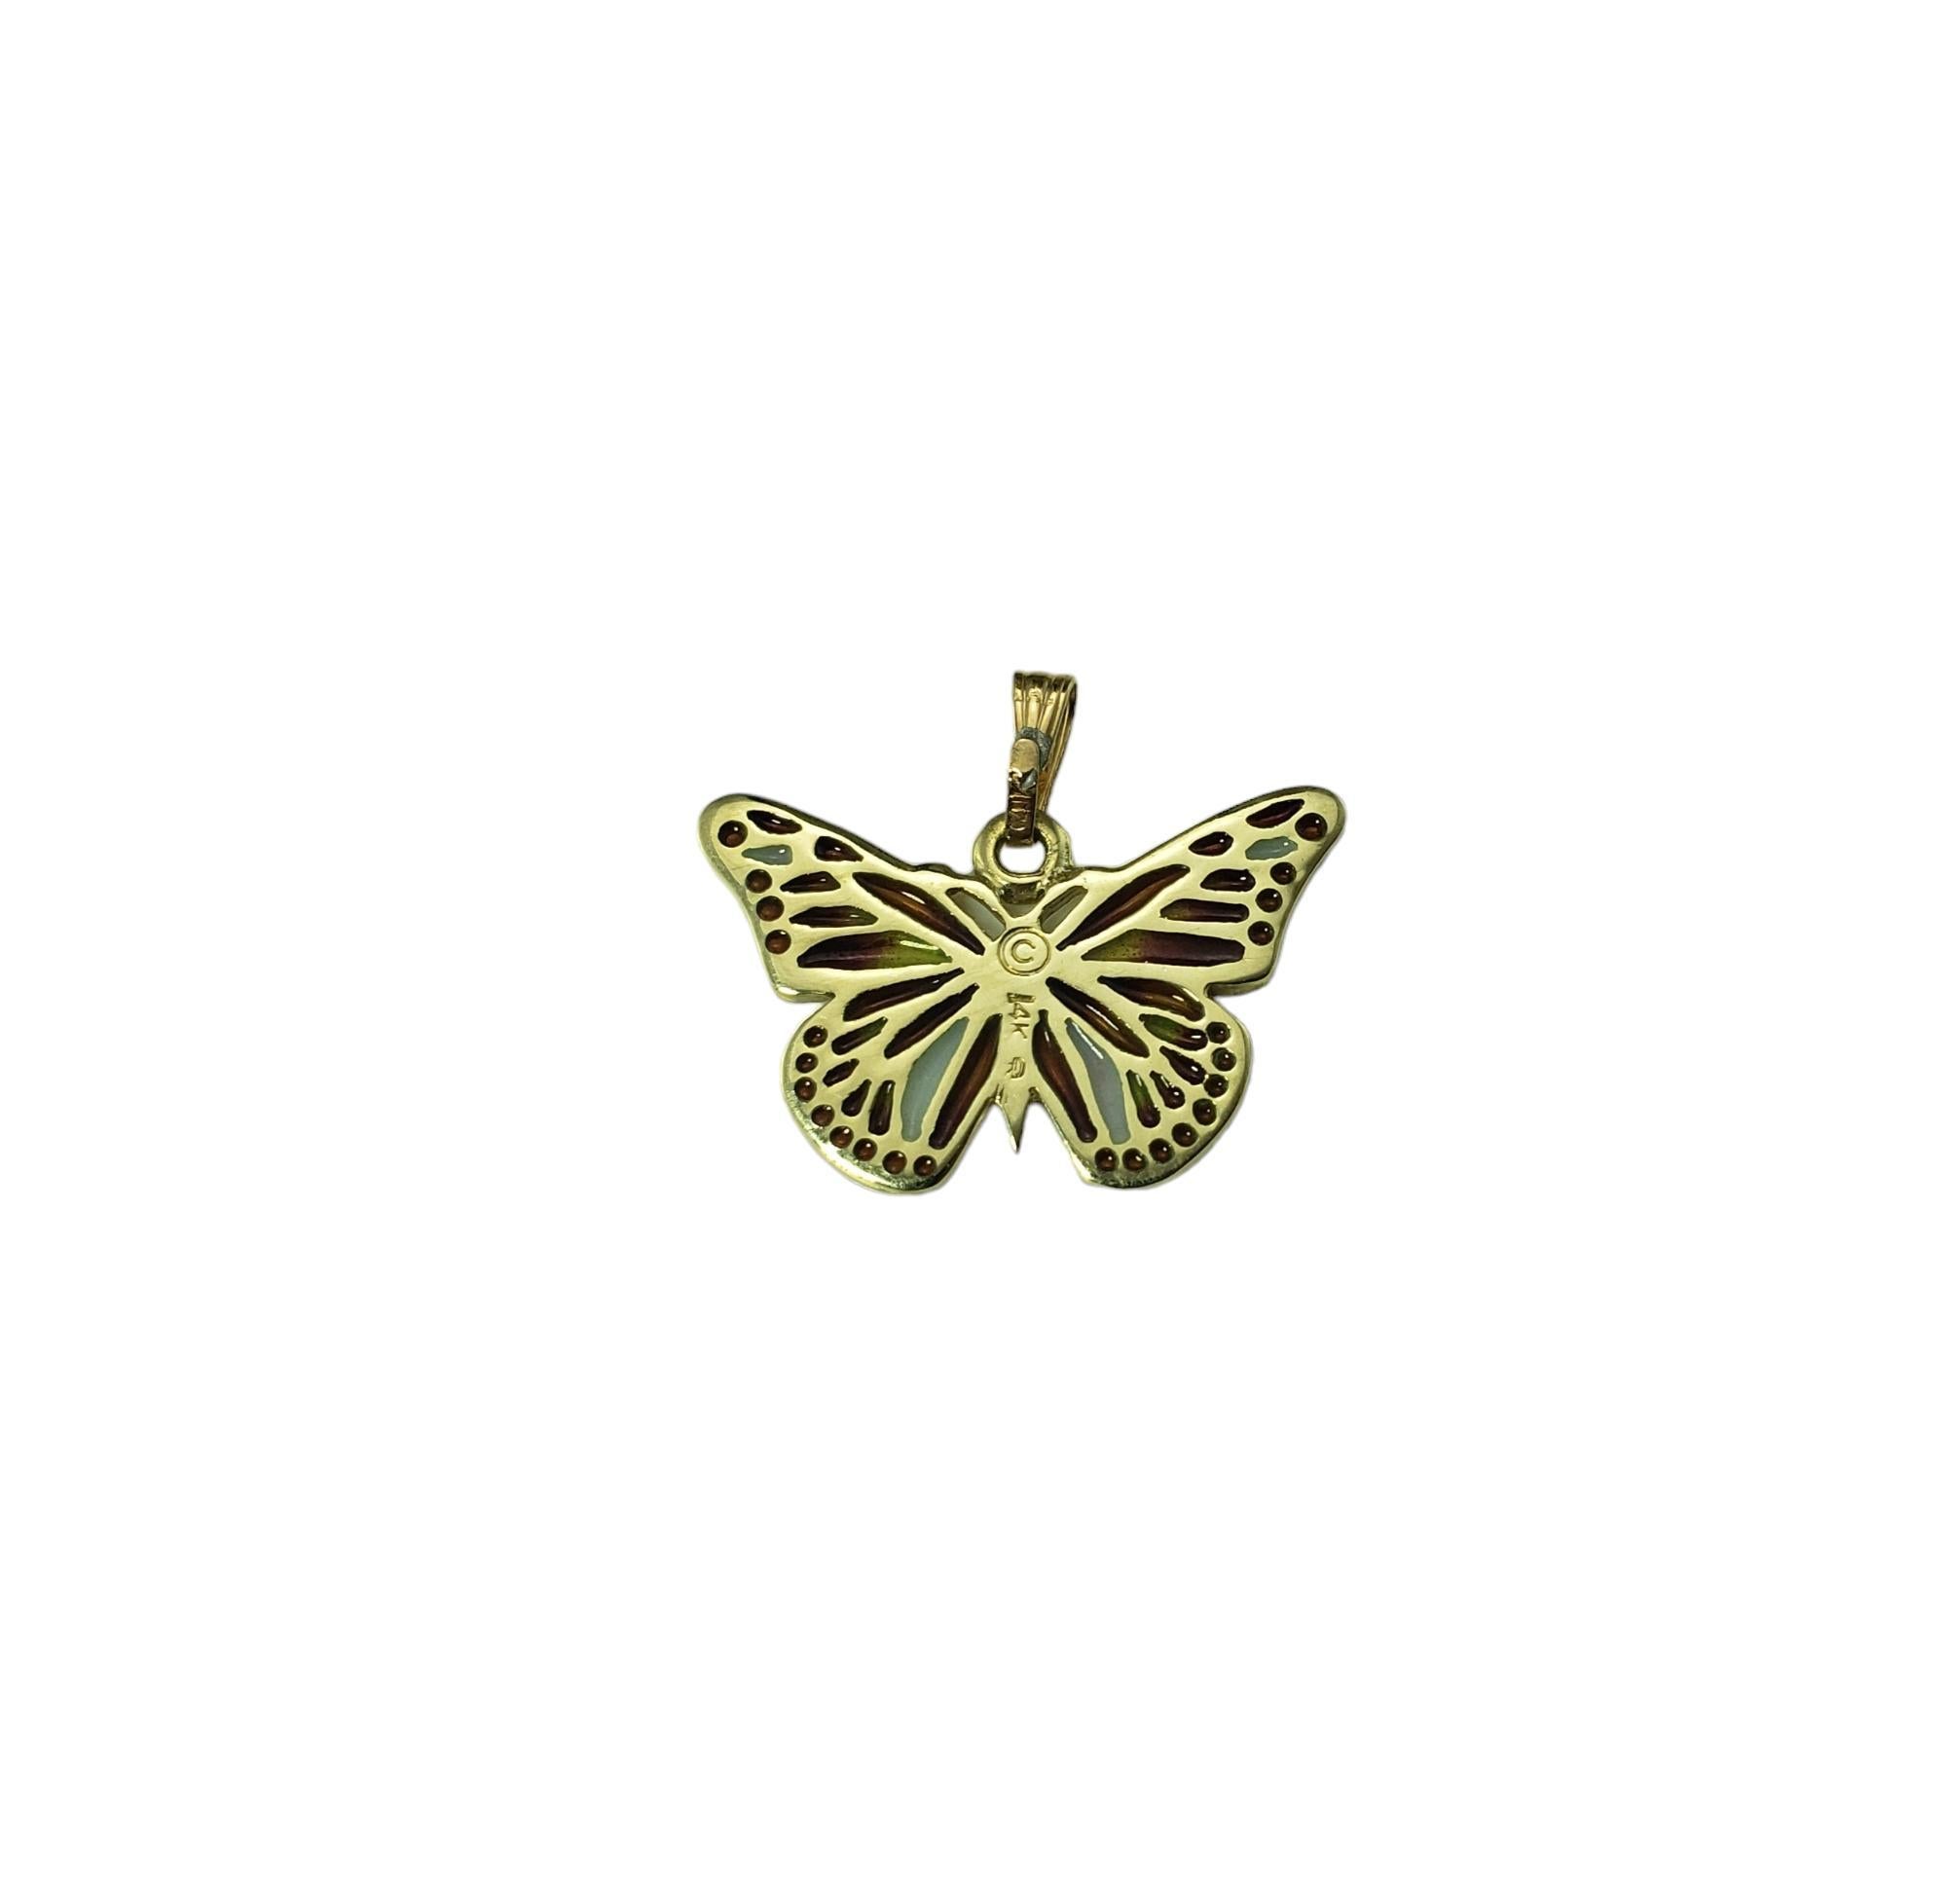  14K Yellow Gold Plique-a-Jour Butterfly Pendant #15526 In Good Condition For Sale In Washington Depot, CT